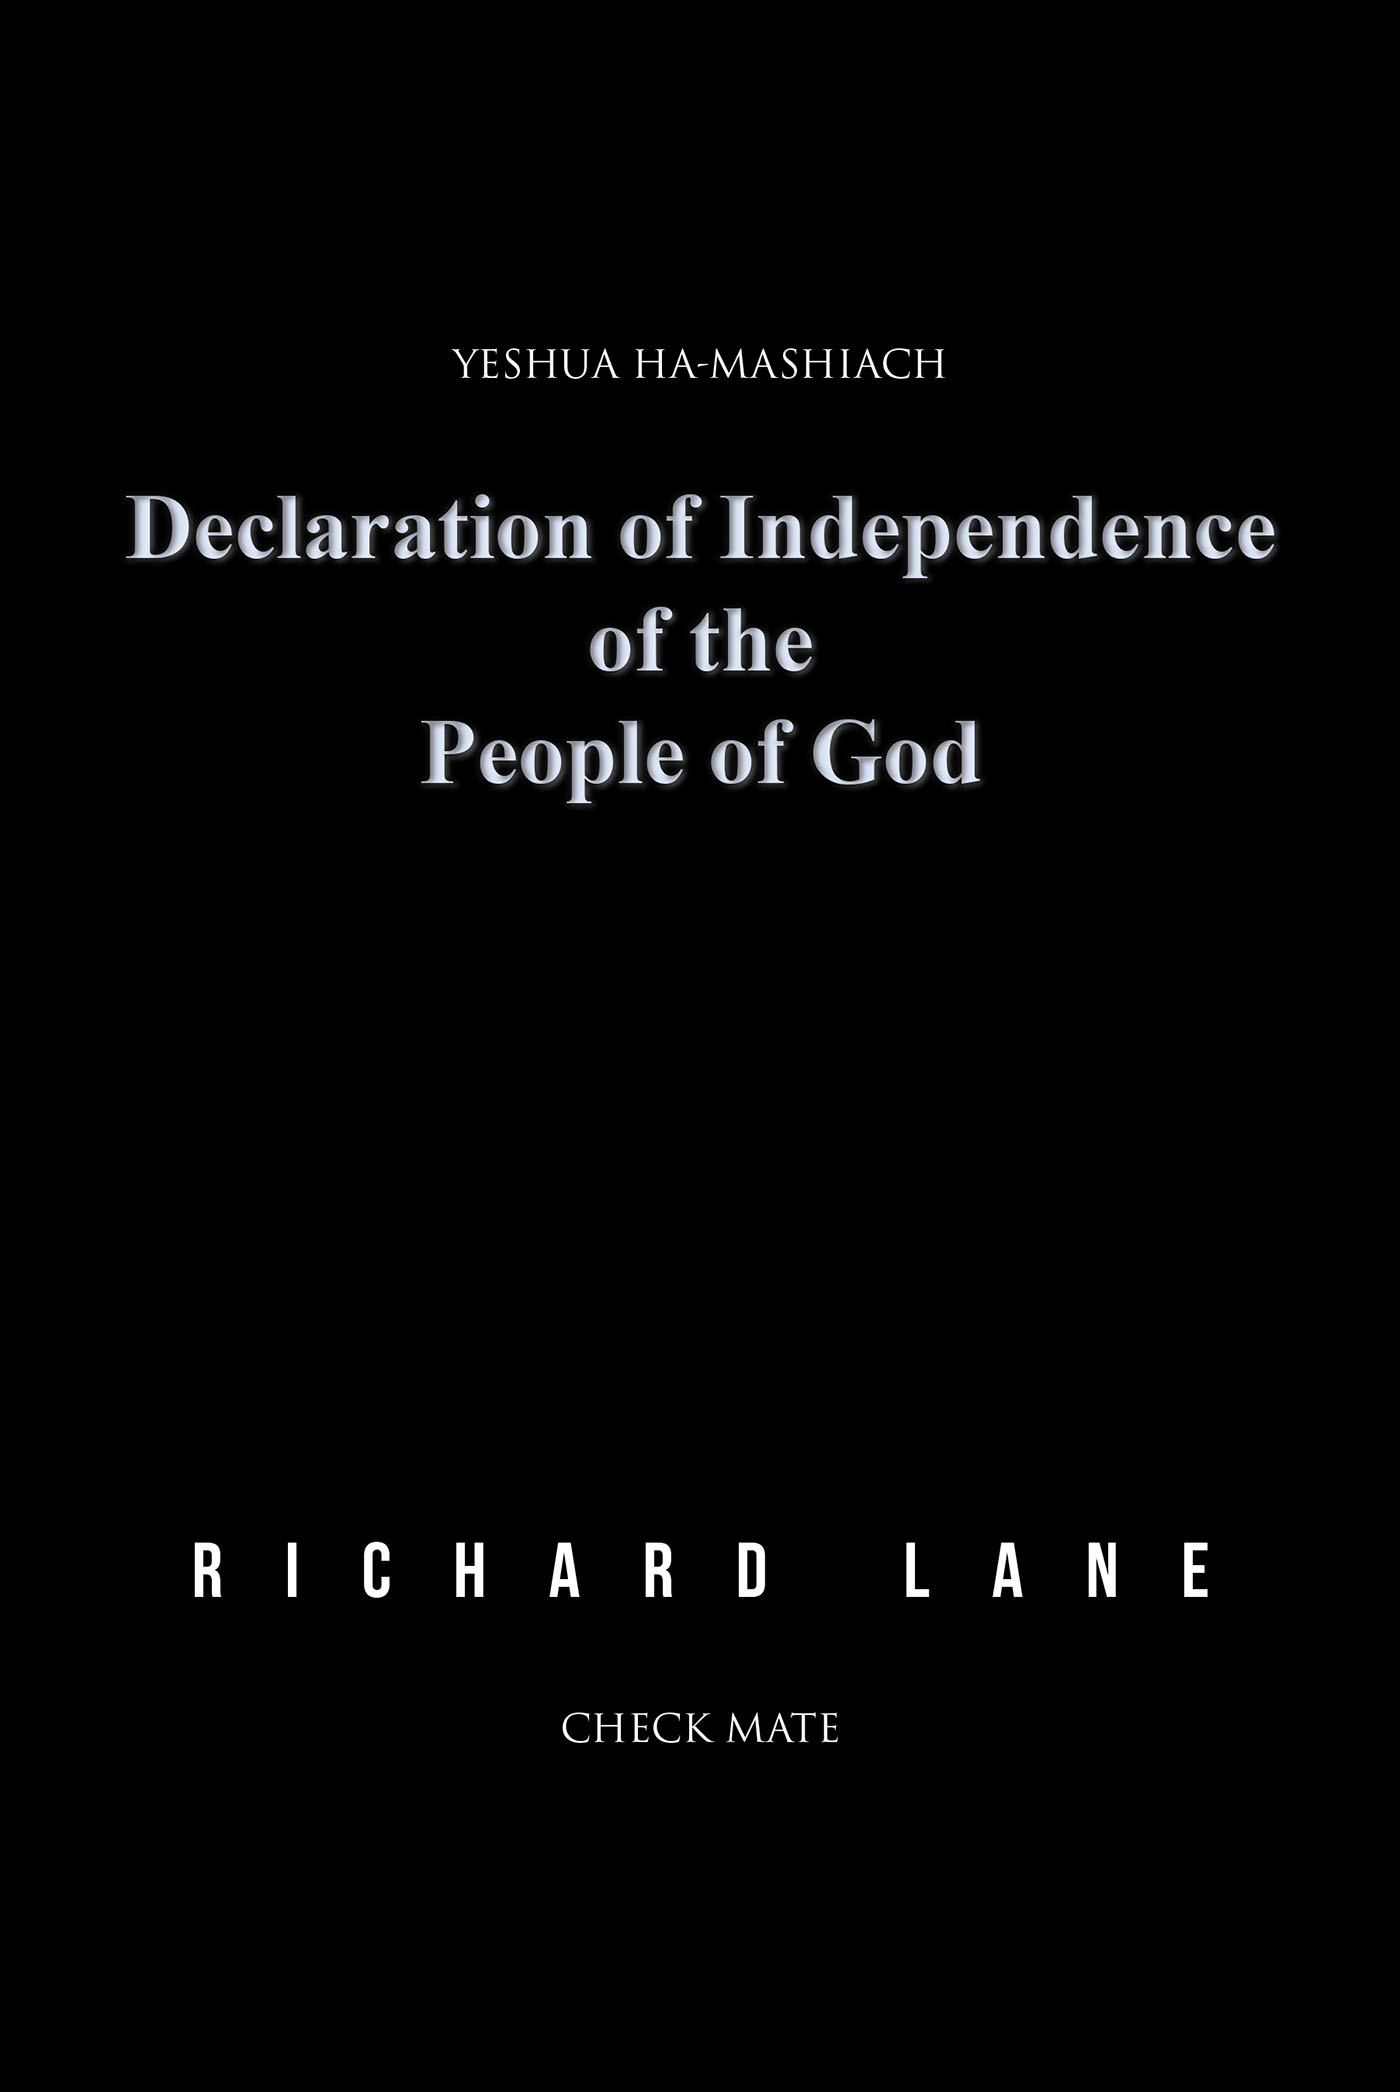 Author Richard Lane’s New Book, "Declaration of Independence of the People of God," Discusses How Modern Religions Have Misled Their Followers and the Lord